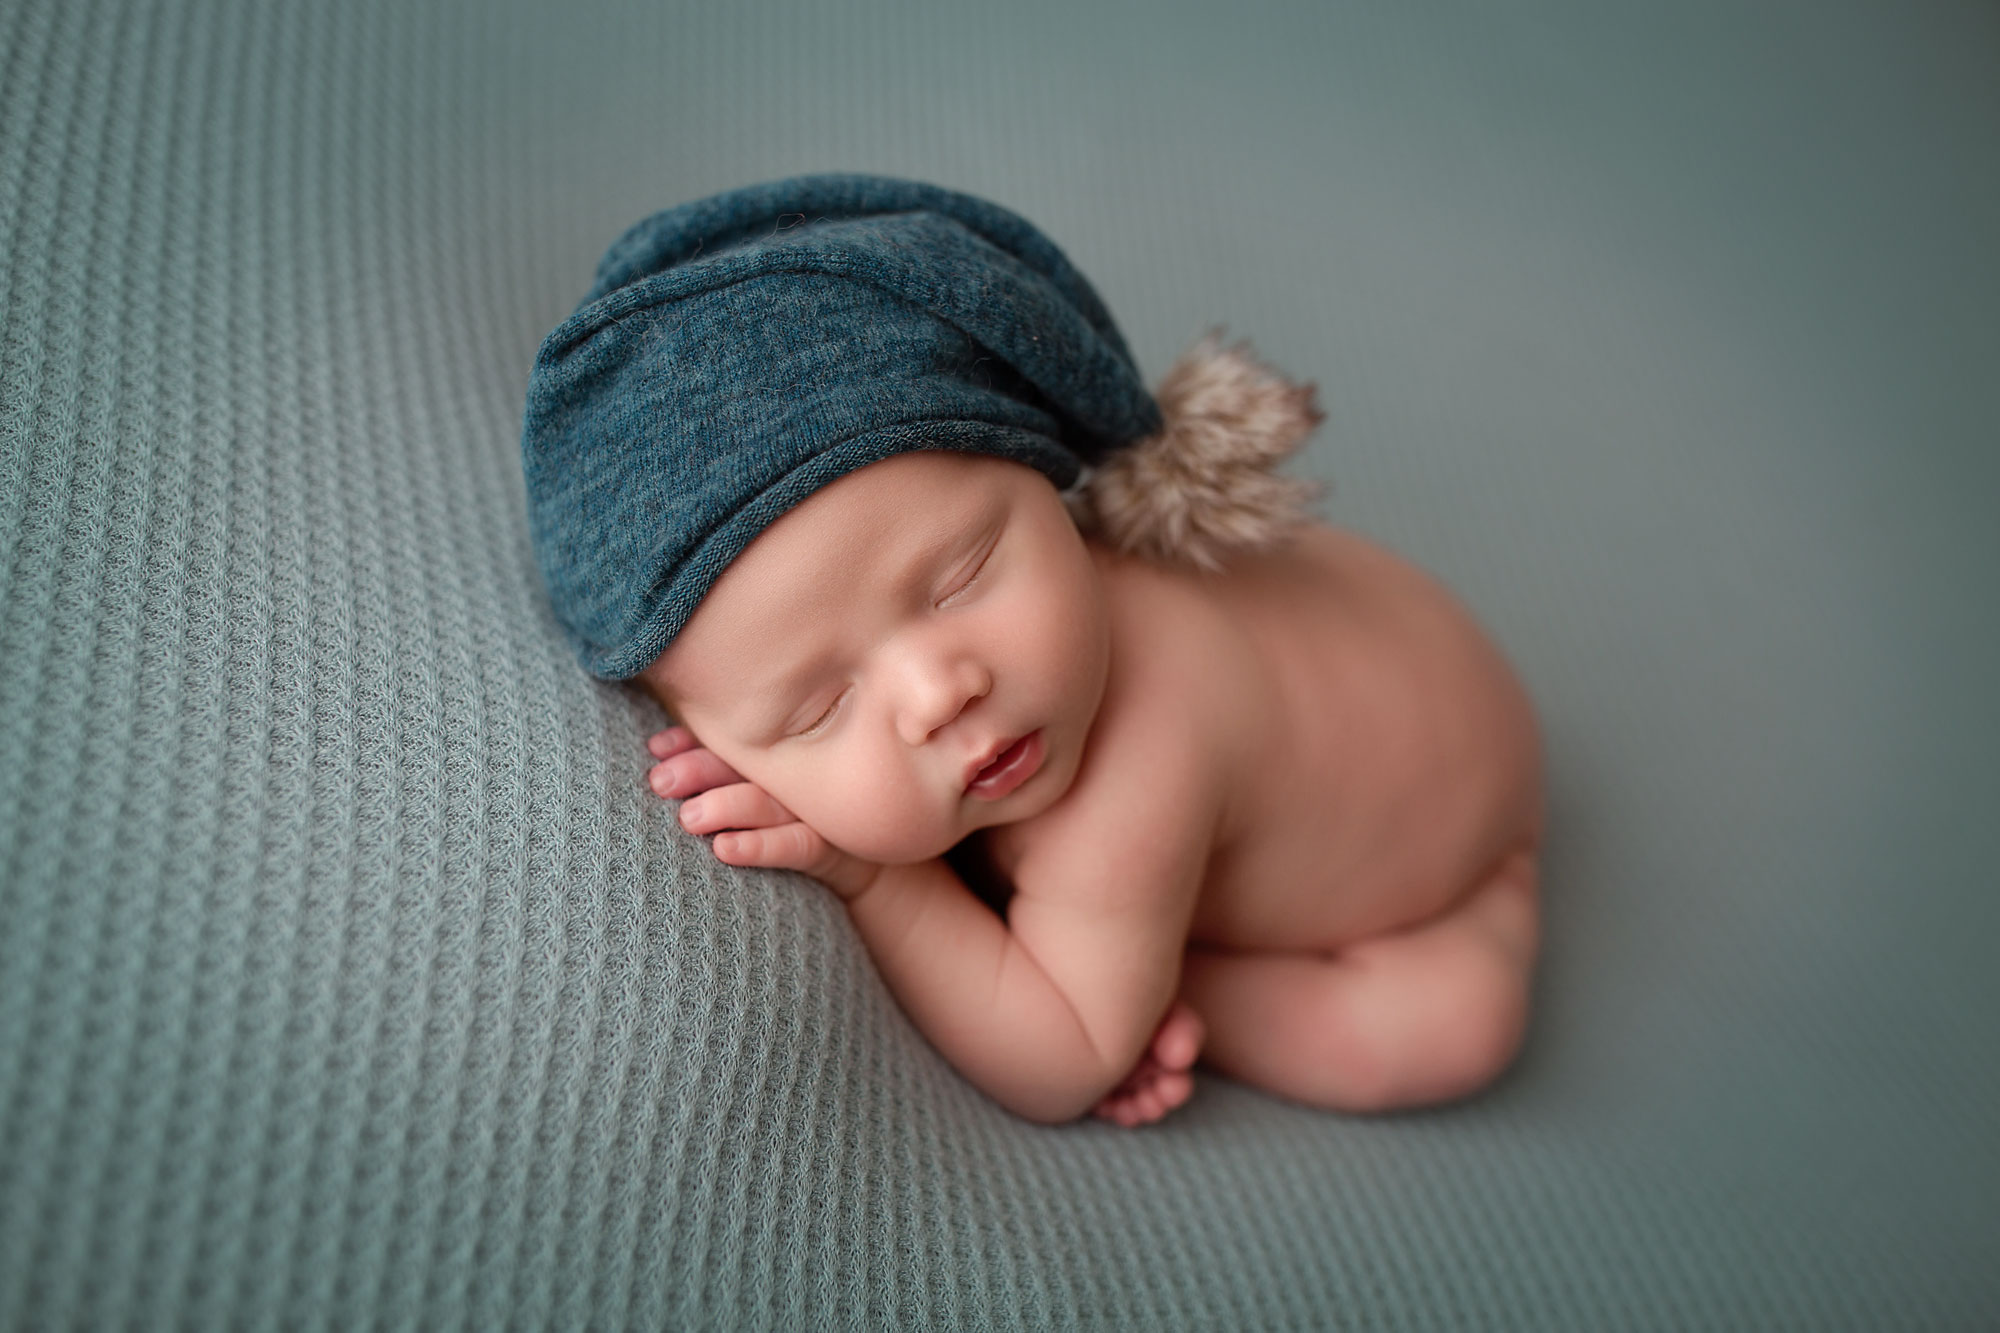 annandale nj newborn photographer, baby boy with blue cap curled up sleeping